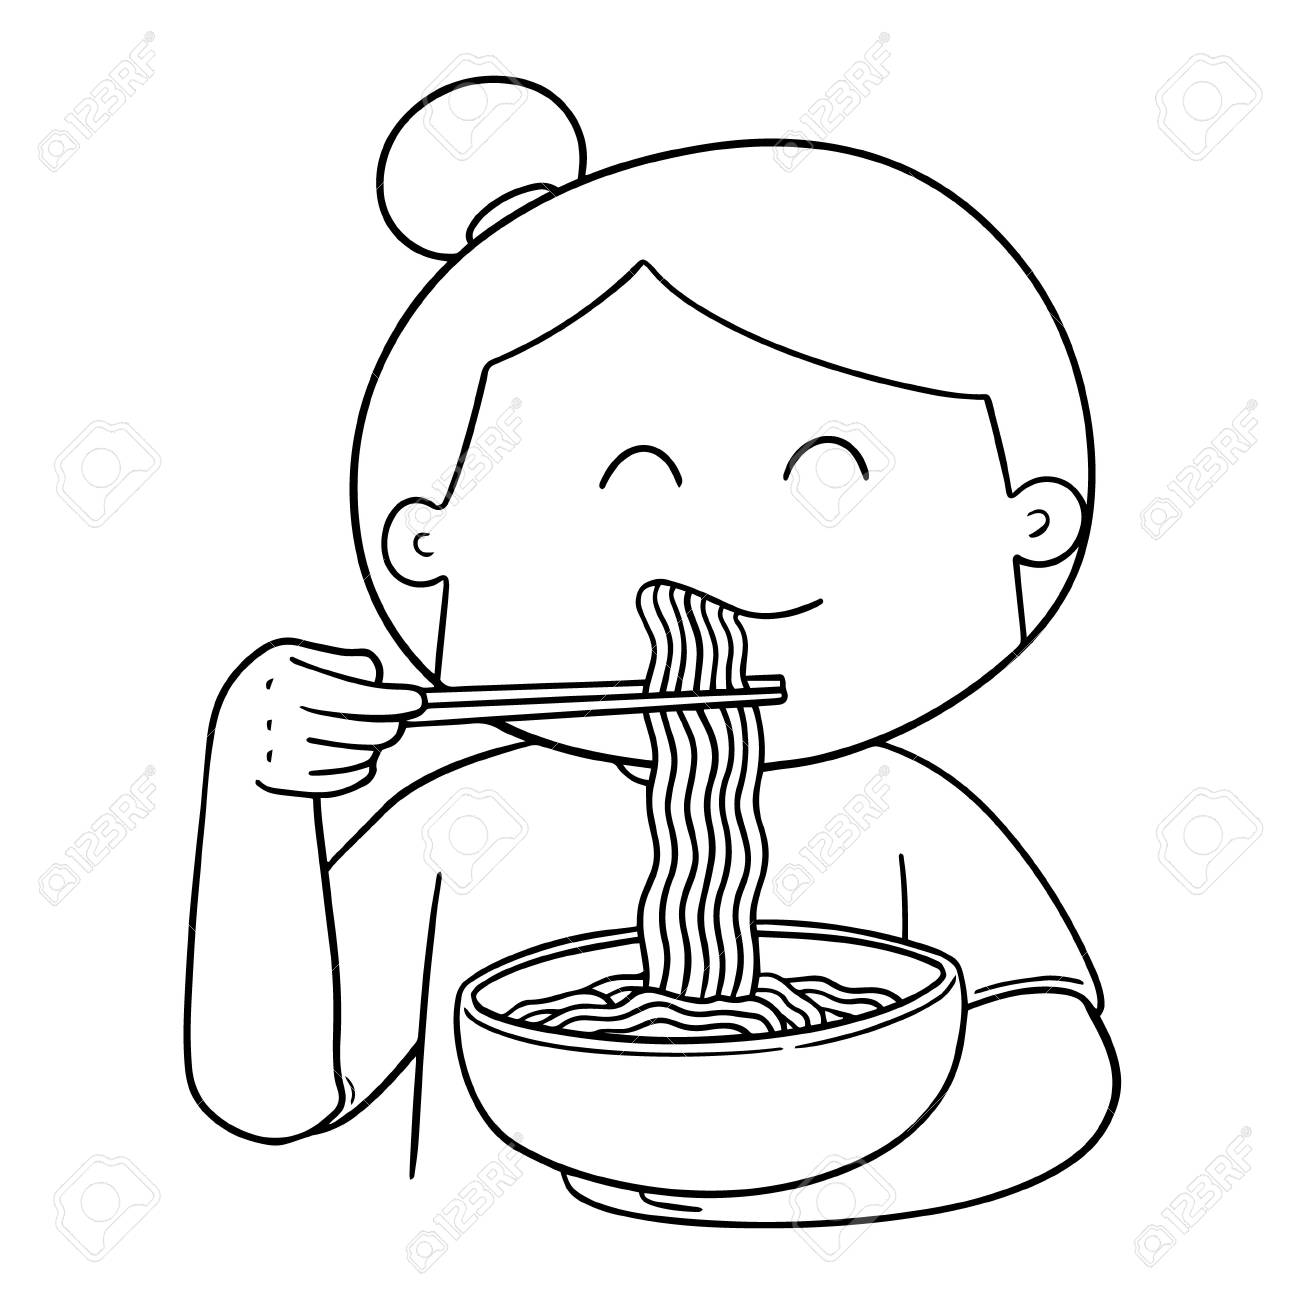 Eating noodles clipart.